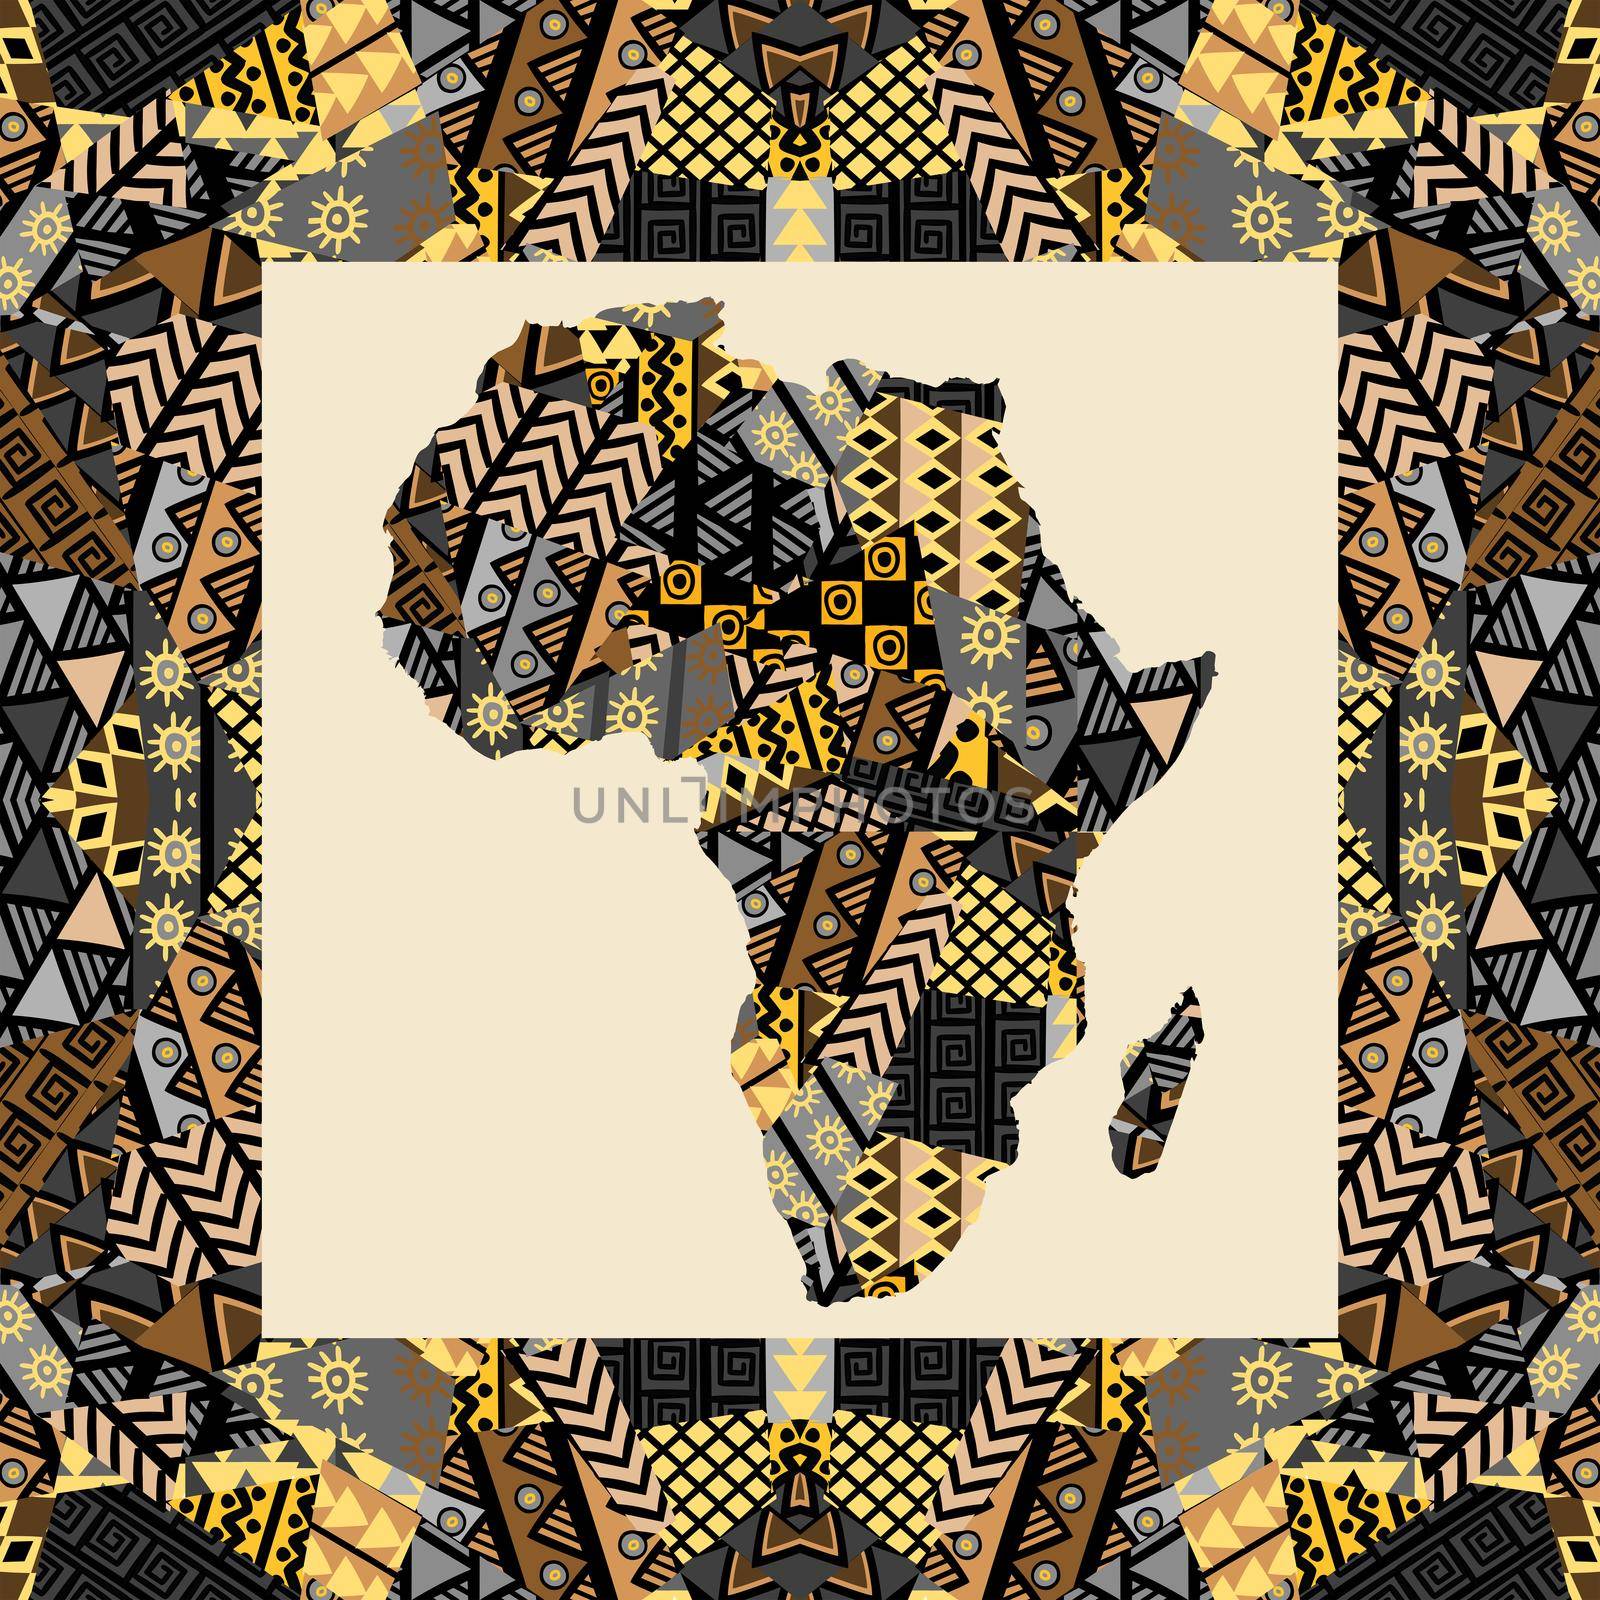 Africa map with ethnic motifs in a middle of a frame by hibrida13